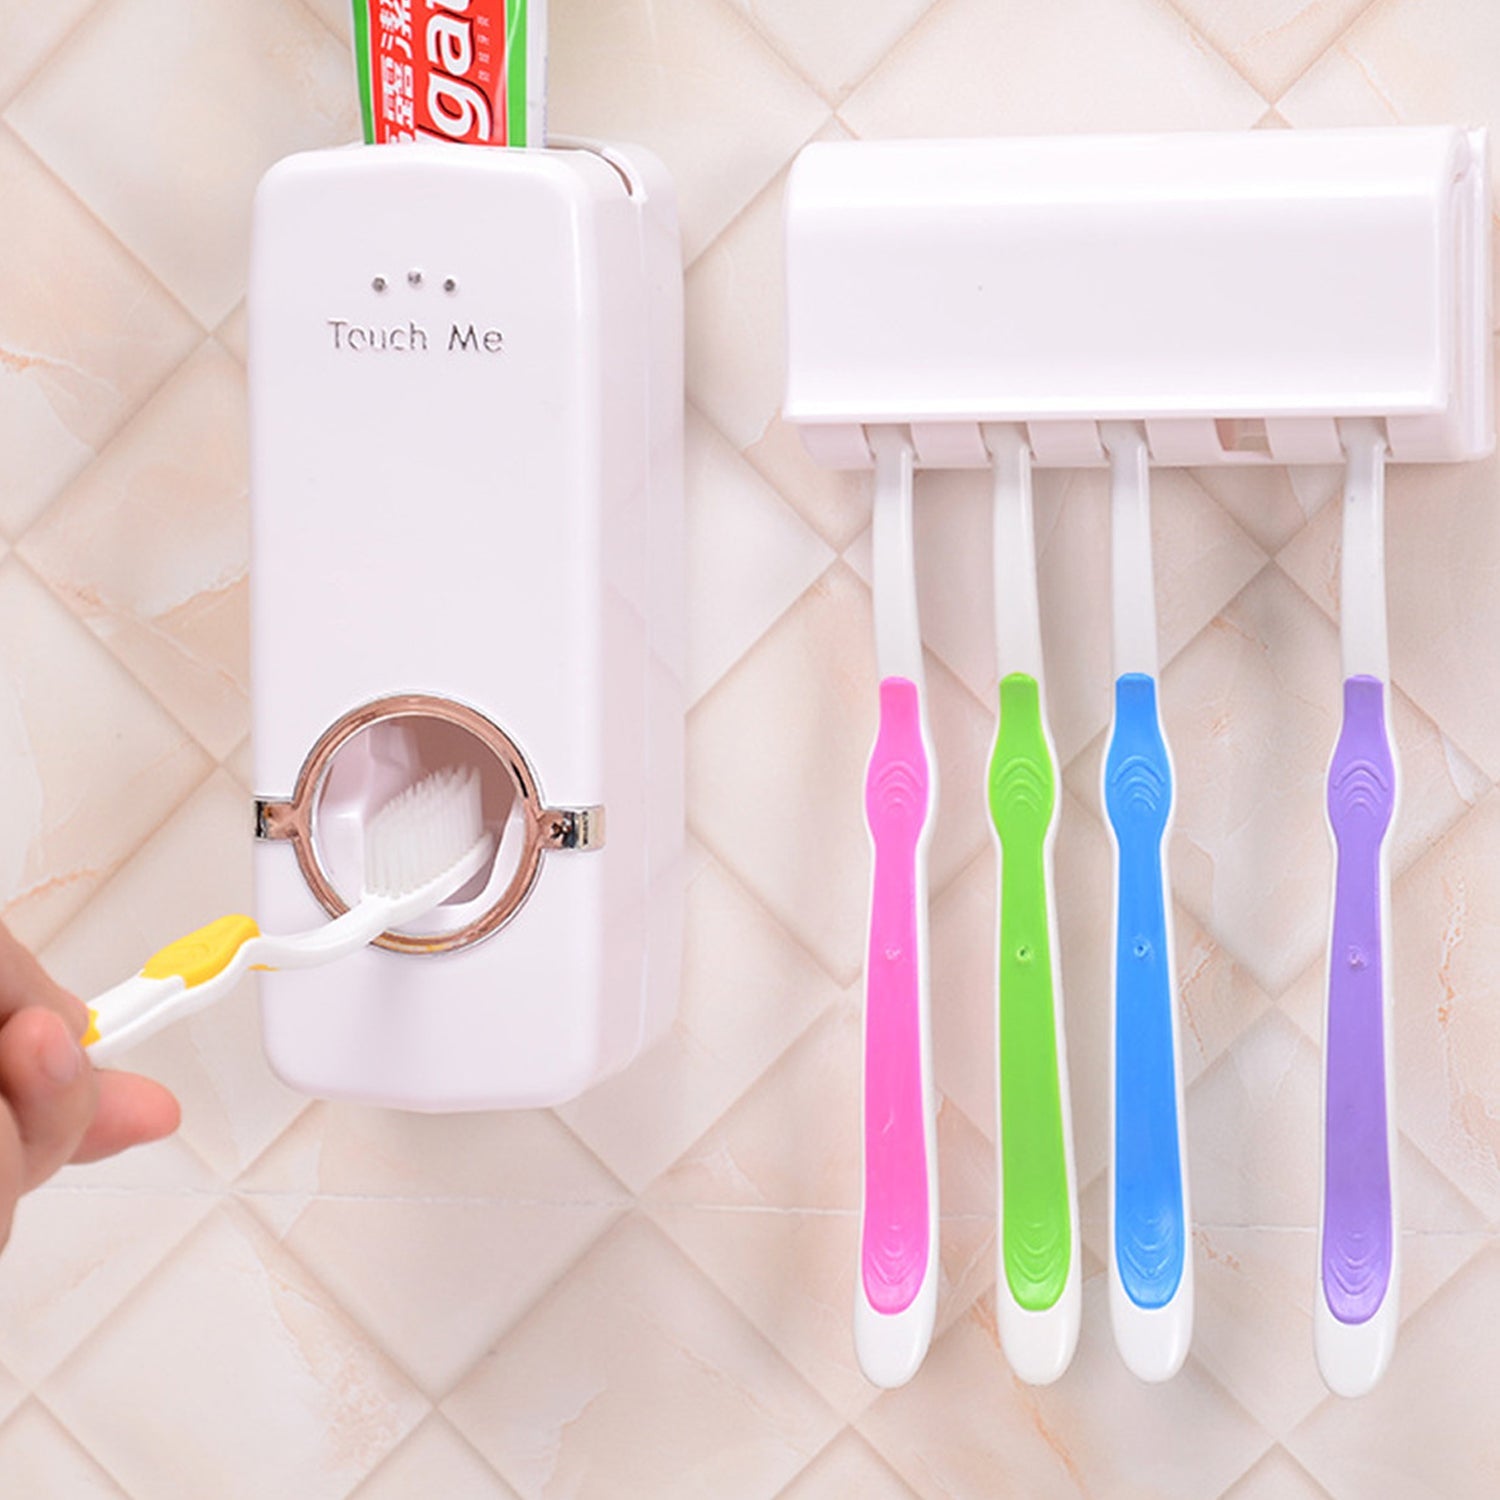 0174A Hands Free Wall Mounted Plastic Dust Proof Automatic Toothpaste Dispenser DeoDap